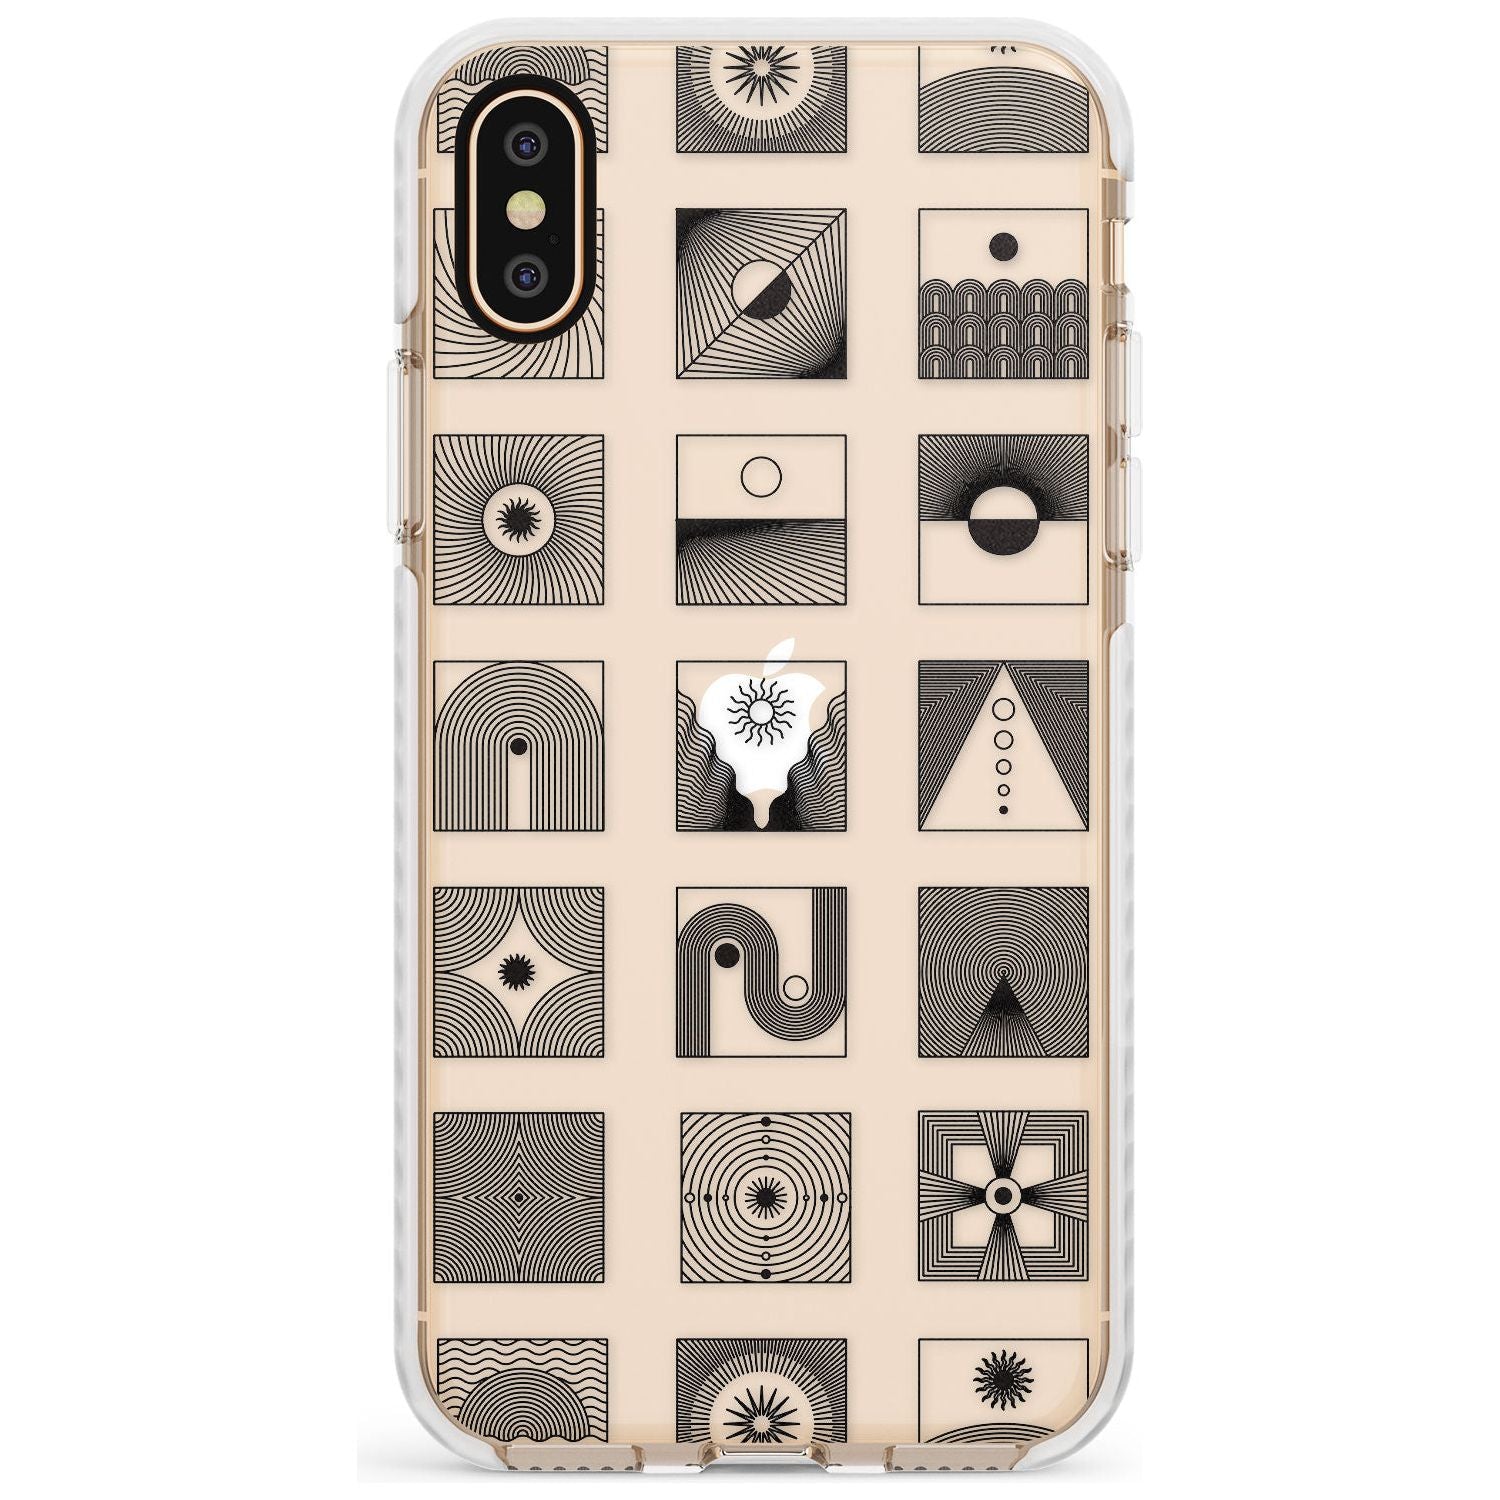 Abstract Lines: Mixed Pattern #1 Slim TPU Phone Case Warehouse X XS Max XR